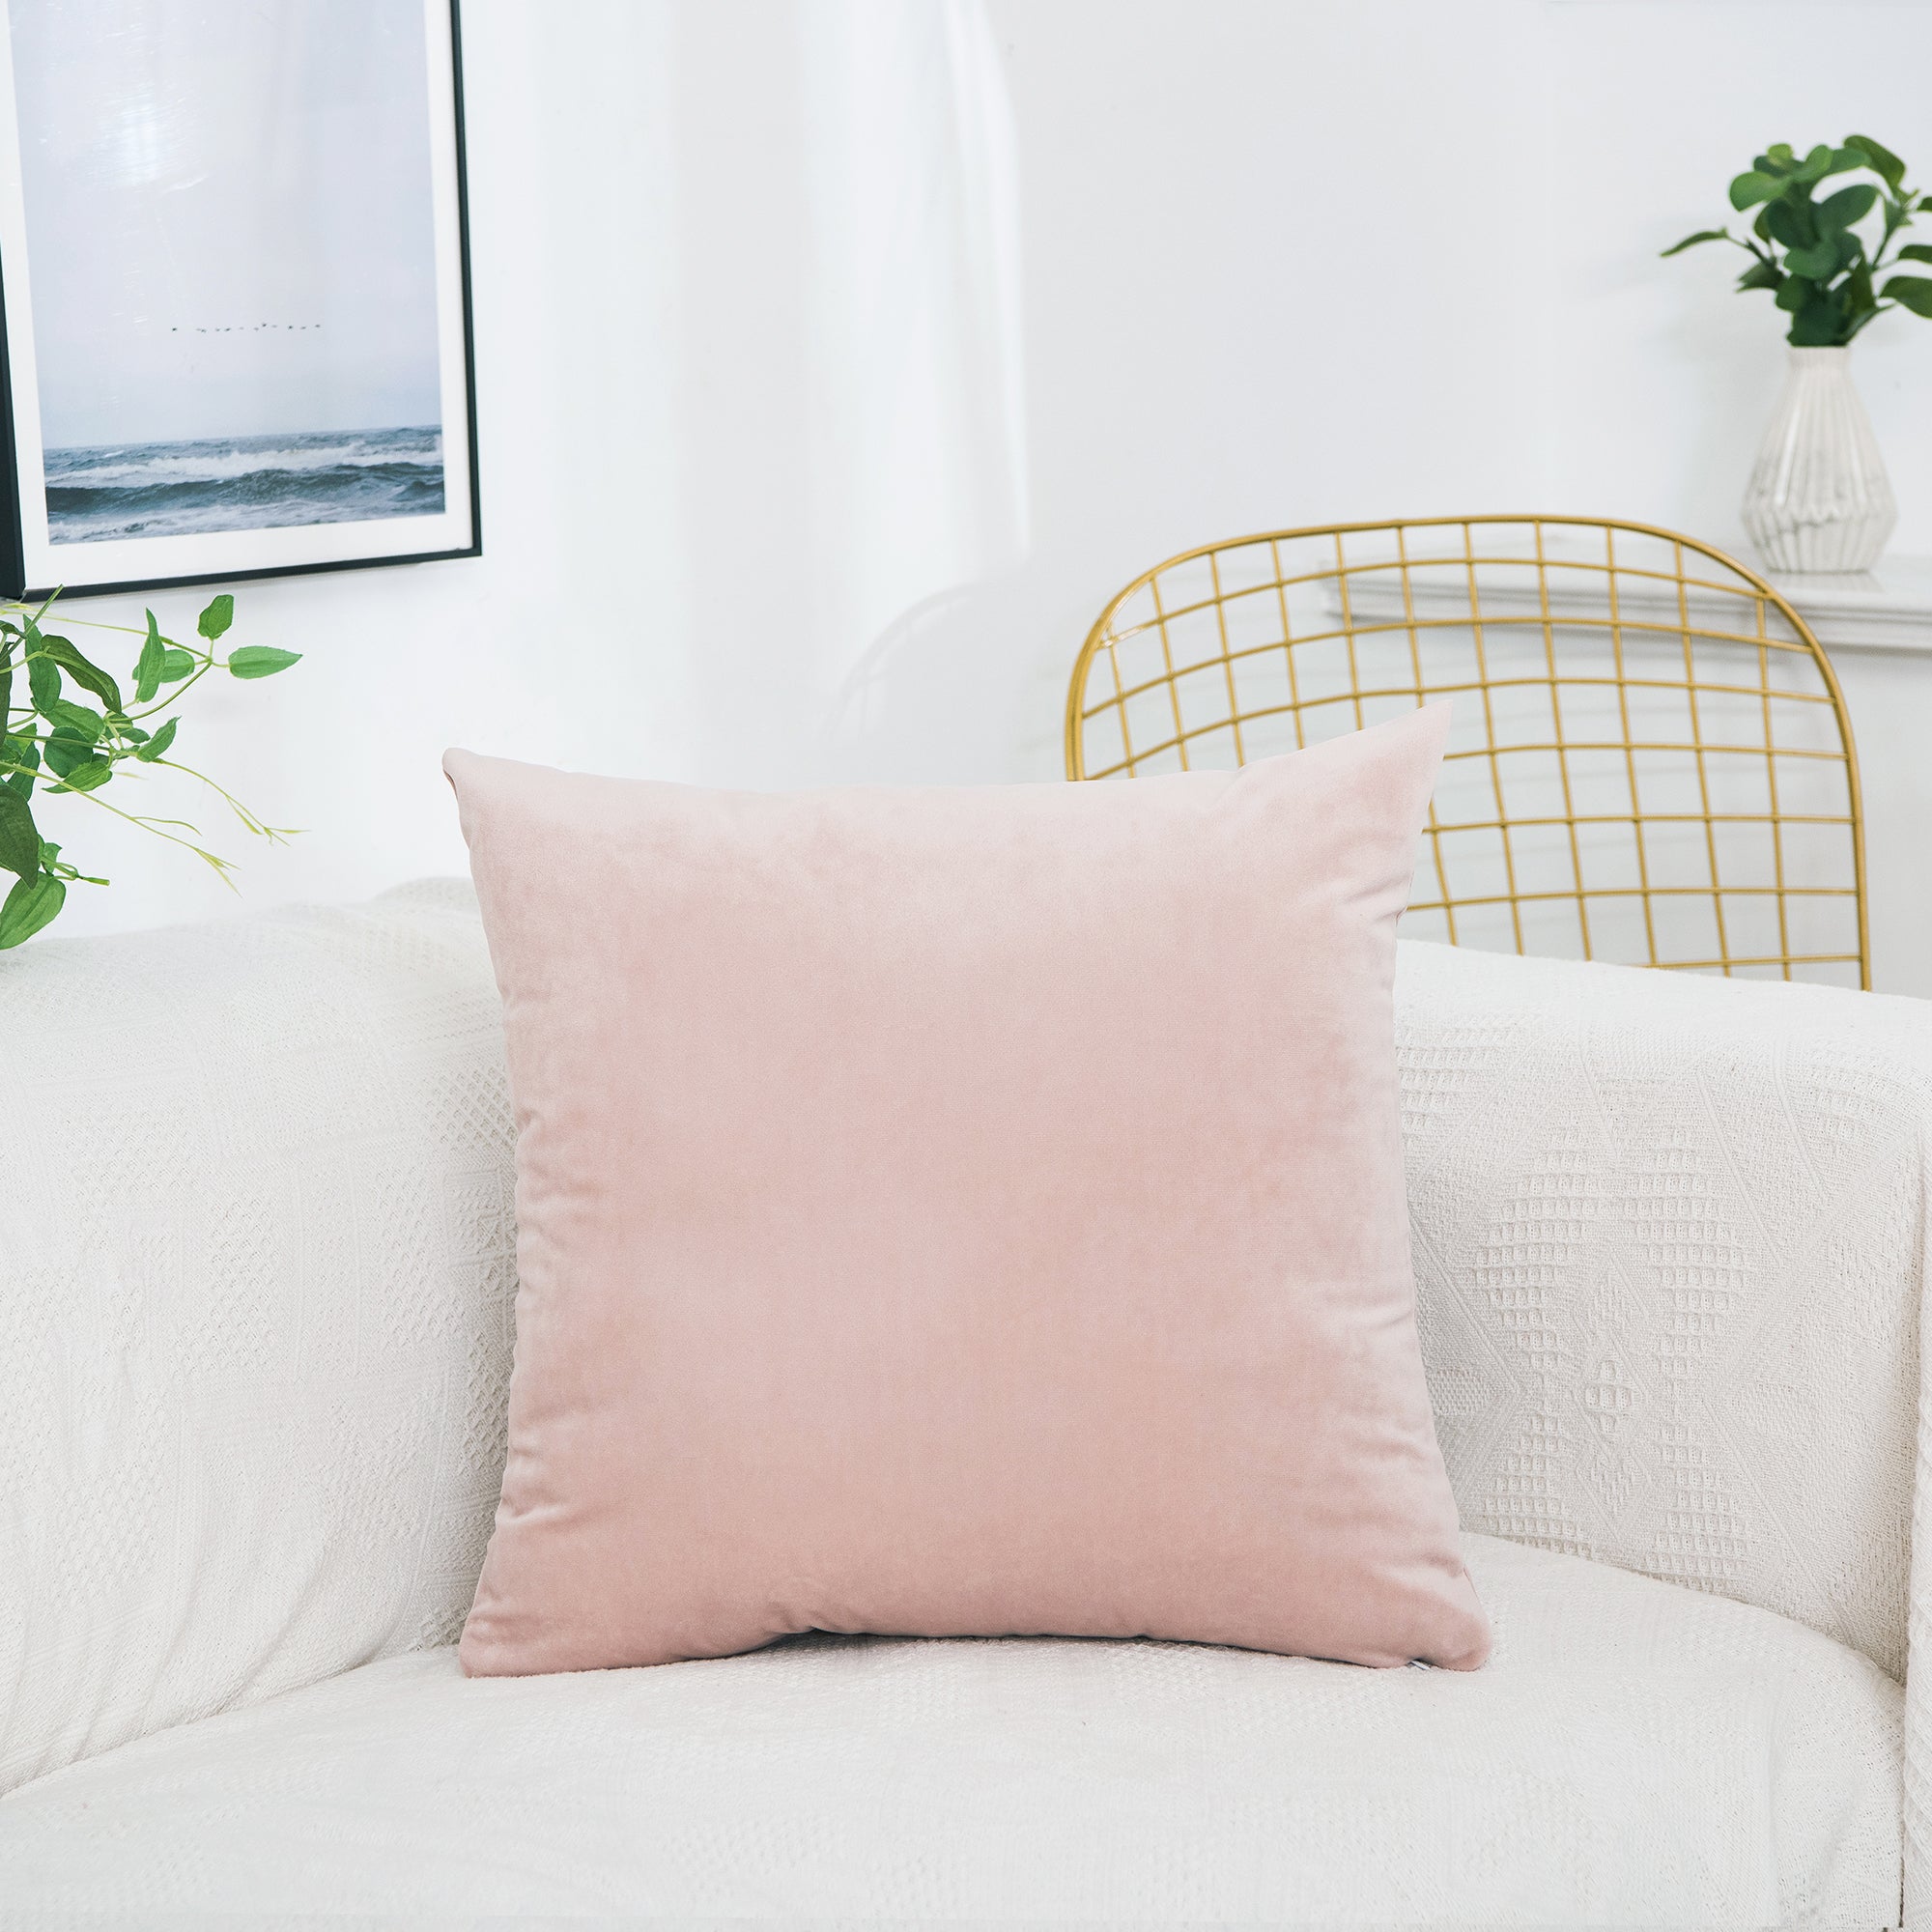 Velvet Fabric Cushion Cover ( 8 color options)